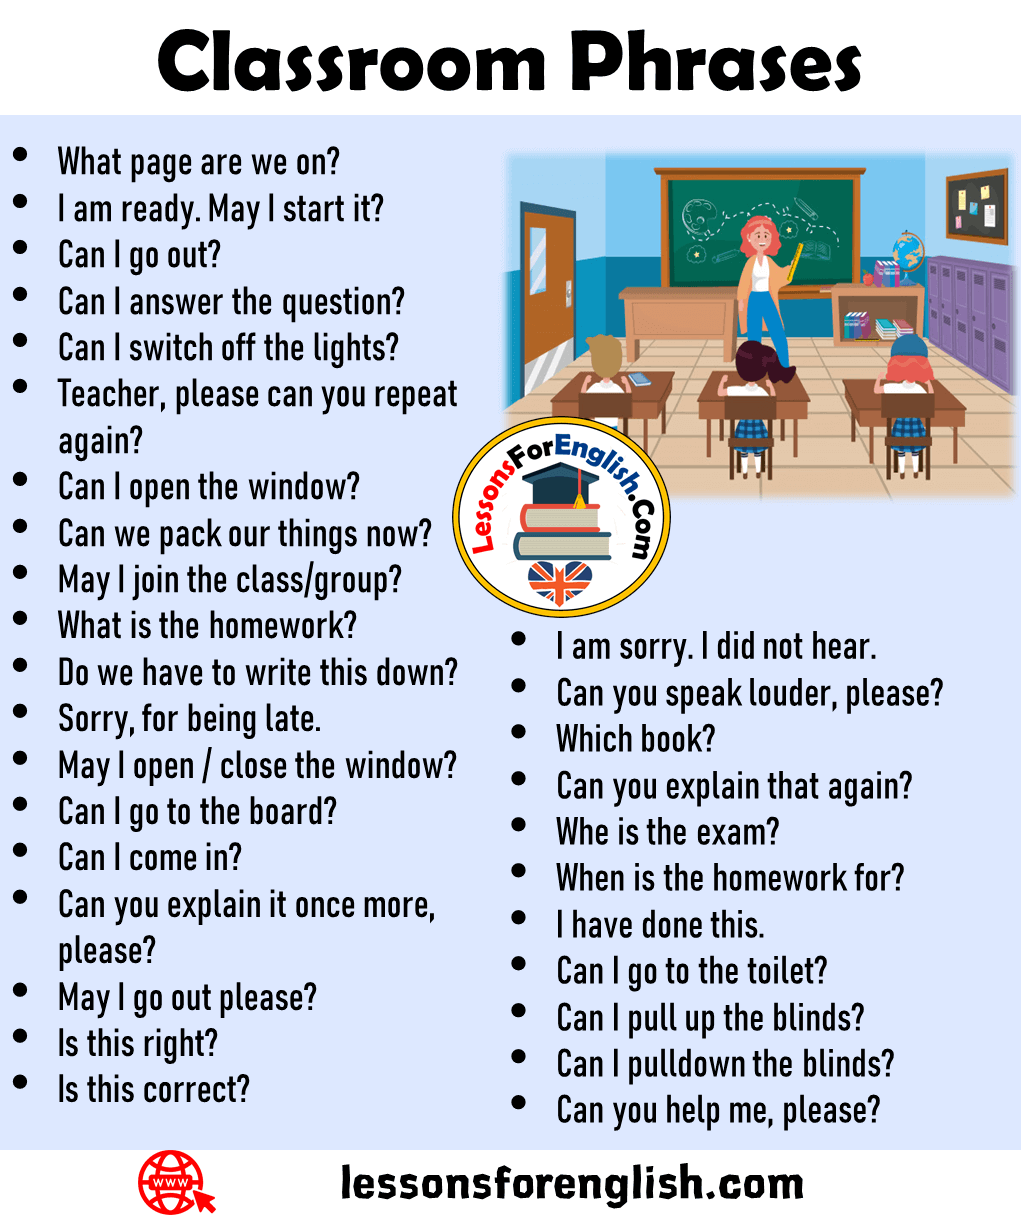 30-english-classroom-phrases-lessons-for-english